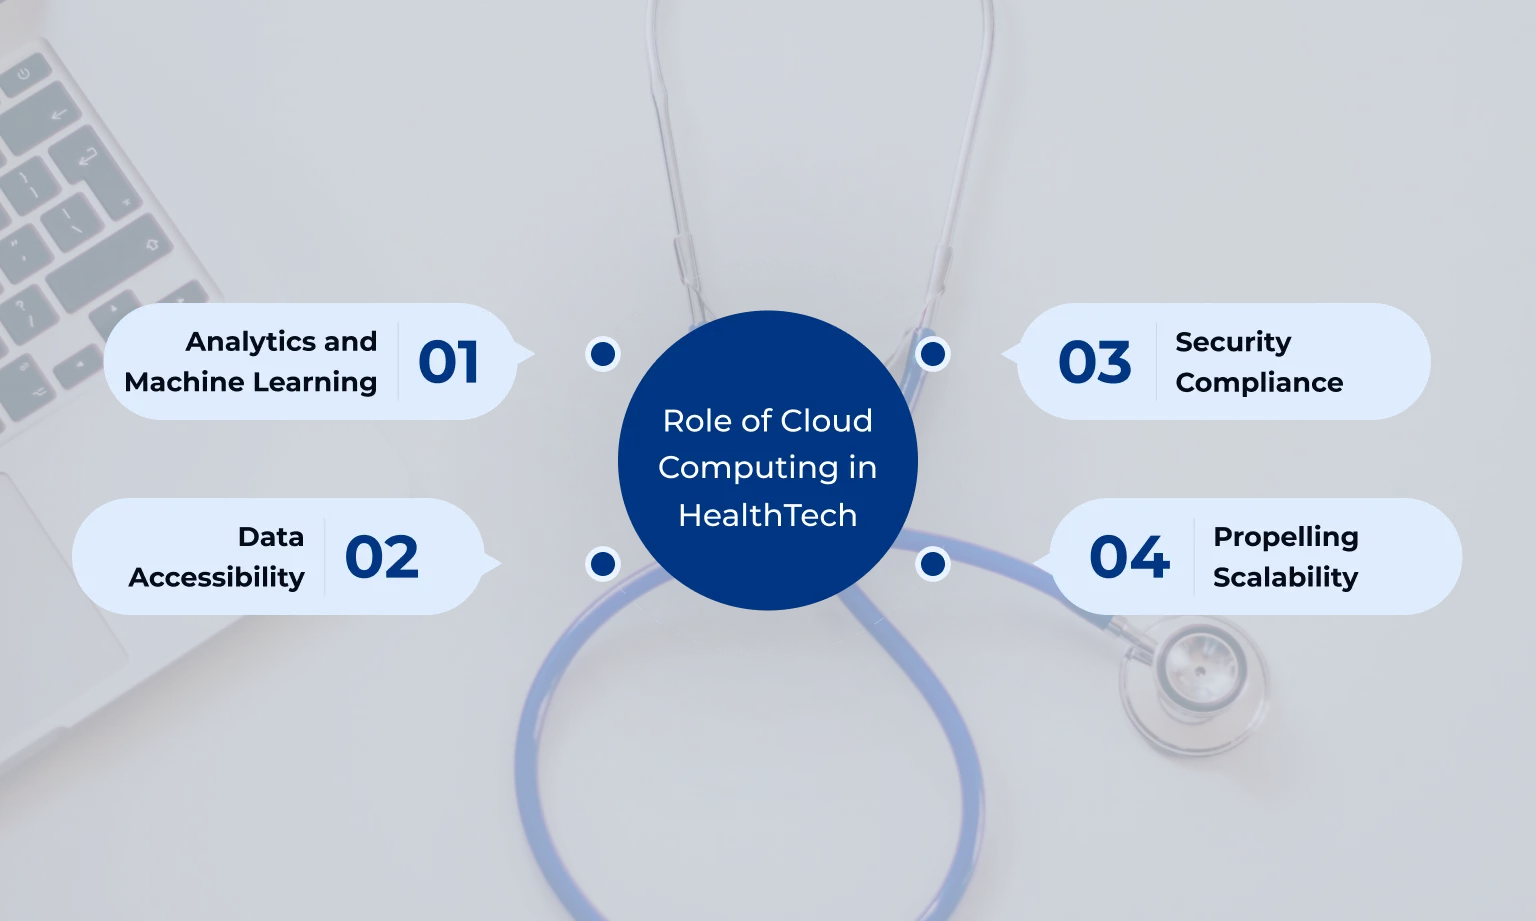 Role of Cloud Computing in HealthTech